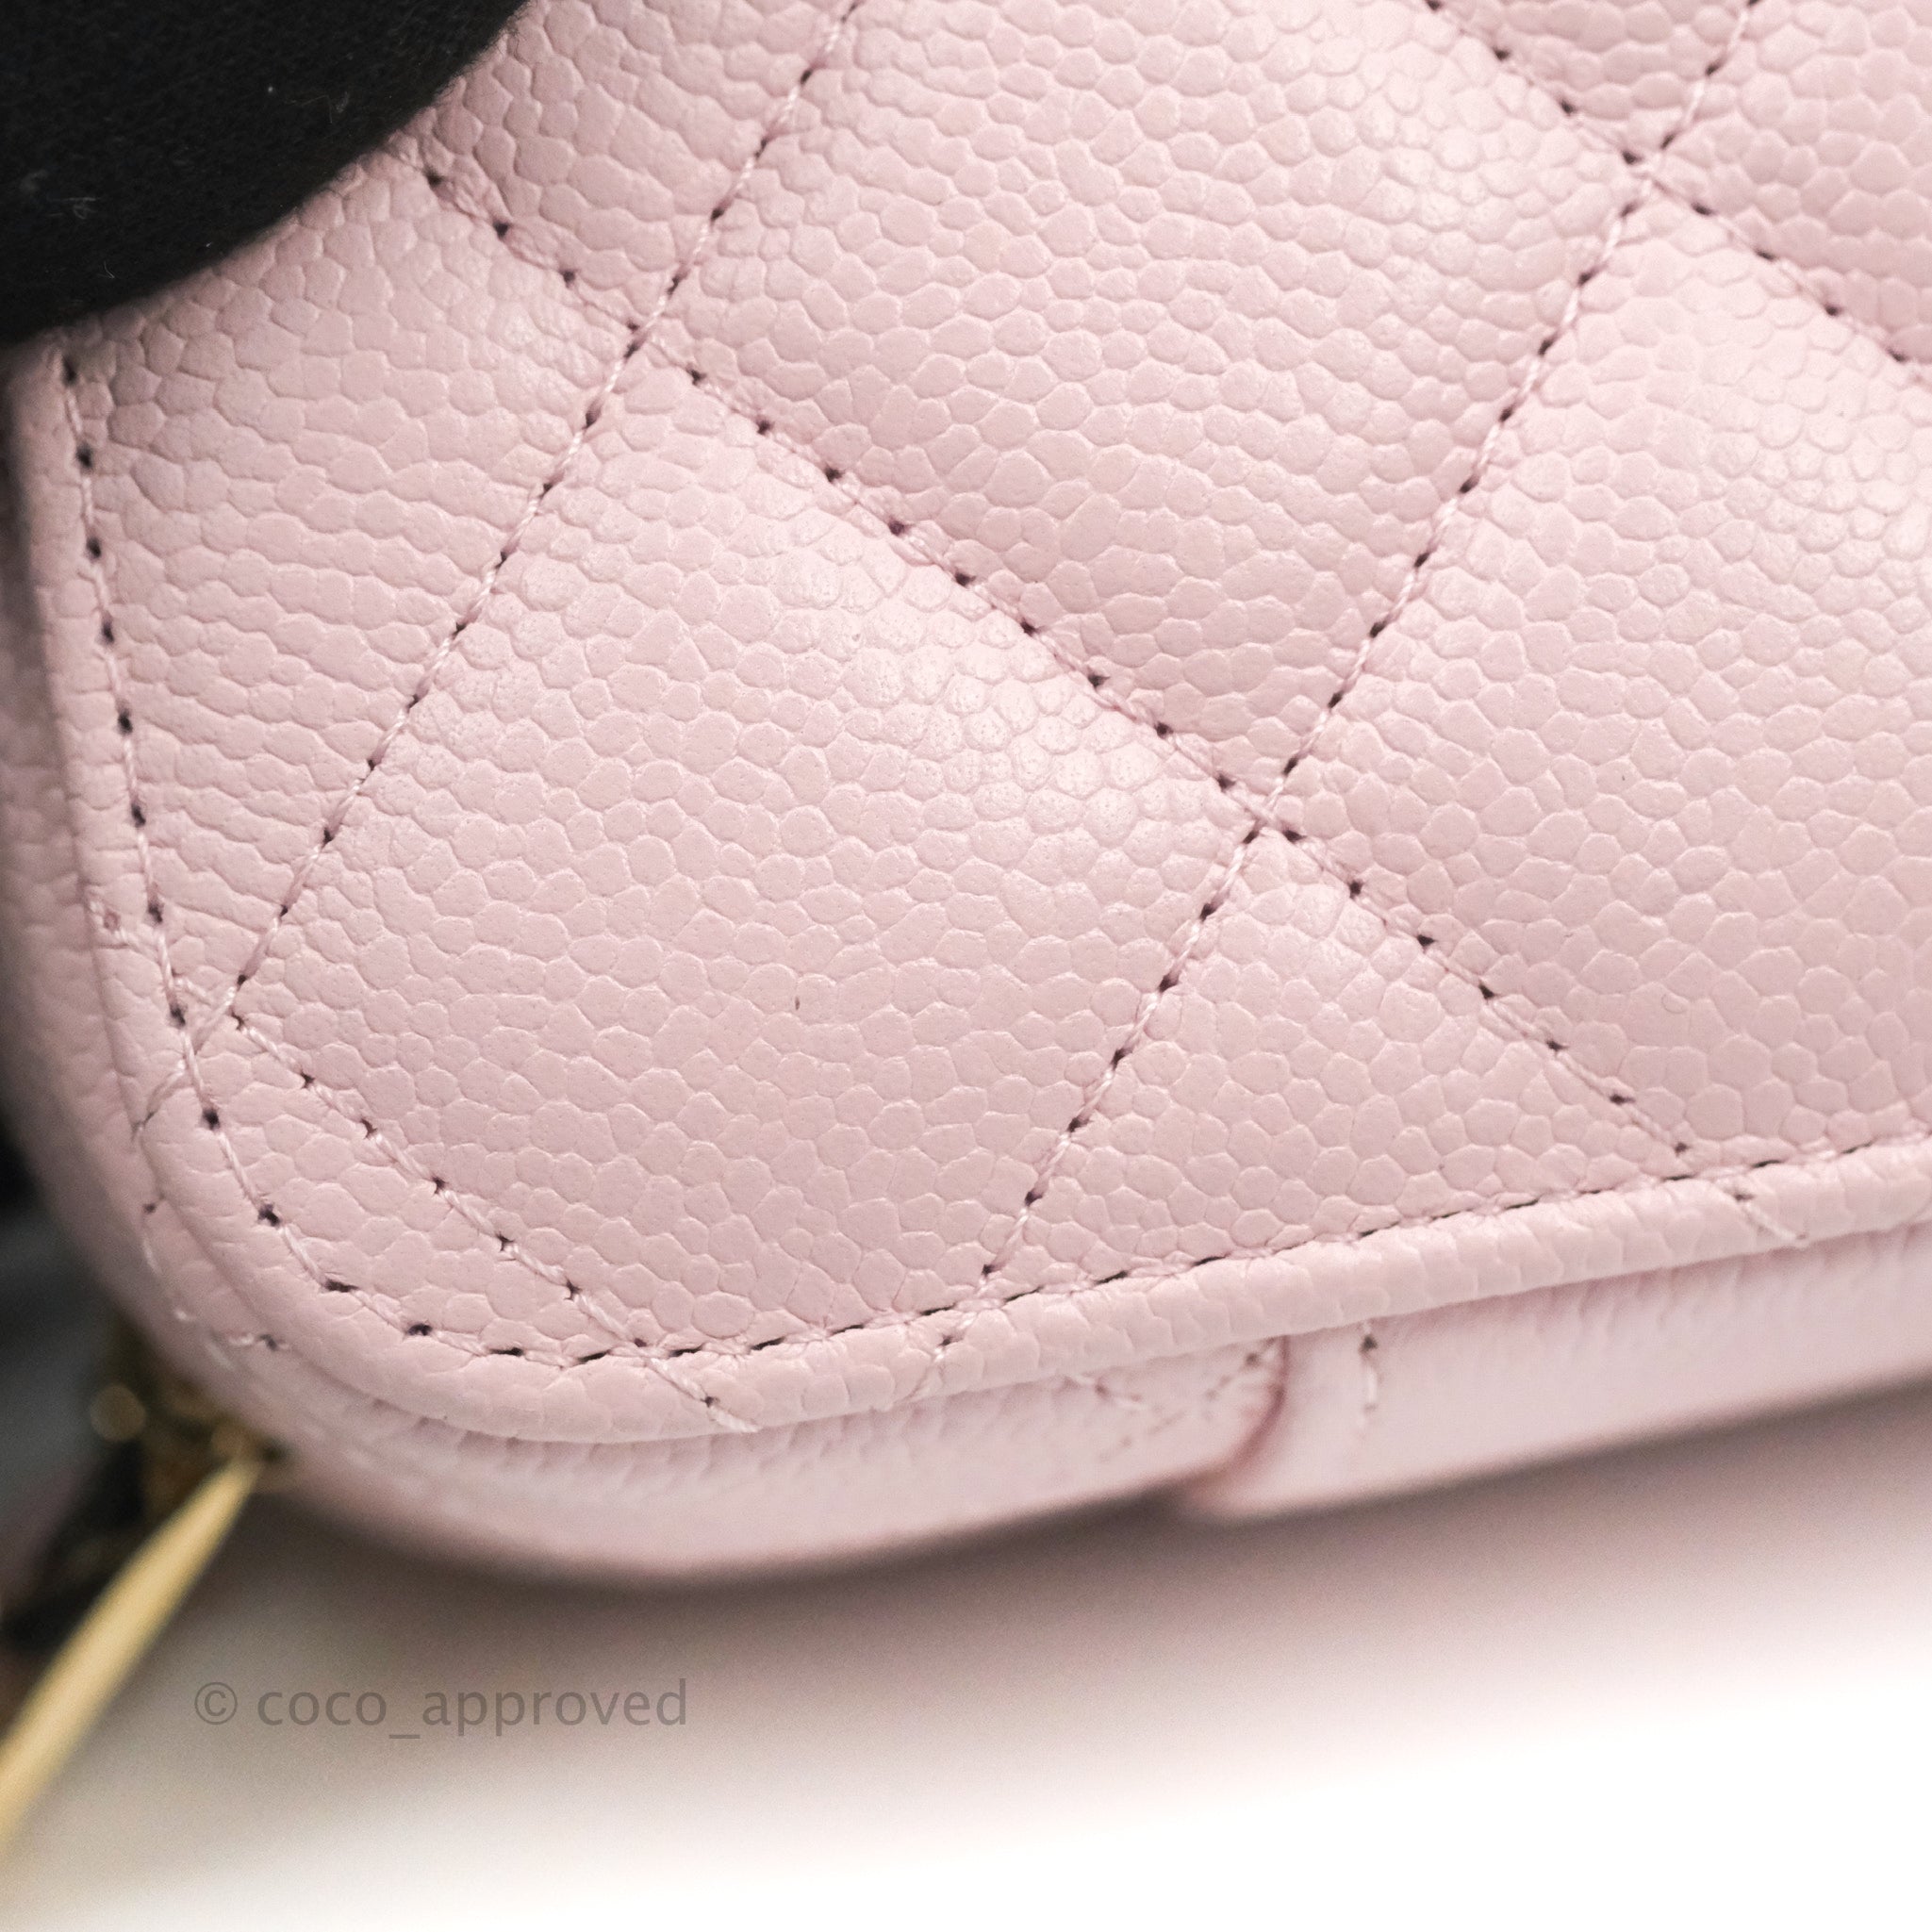 CHANEL Caviar Quilted Small Top Handle Vanity Case With Chain Light Pink  760387